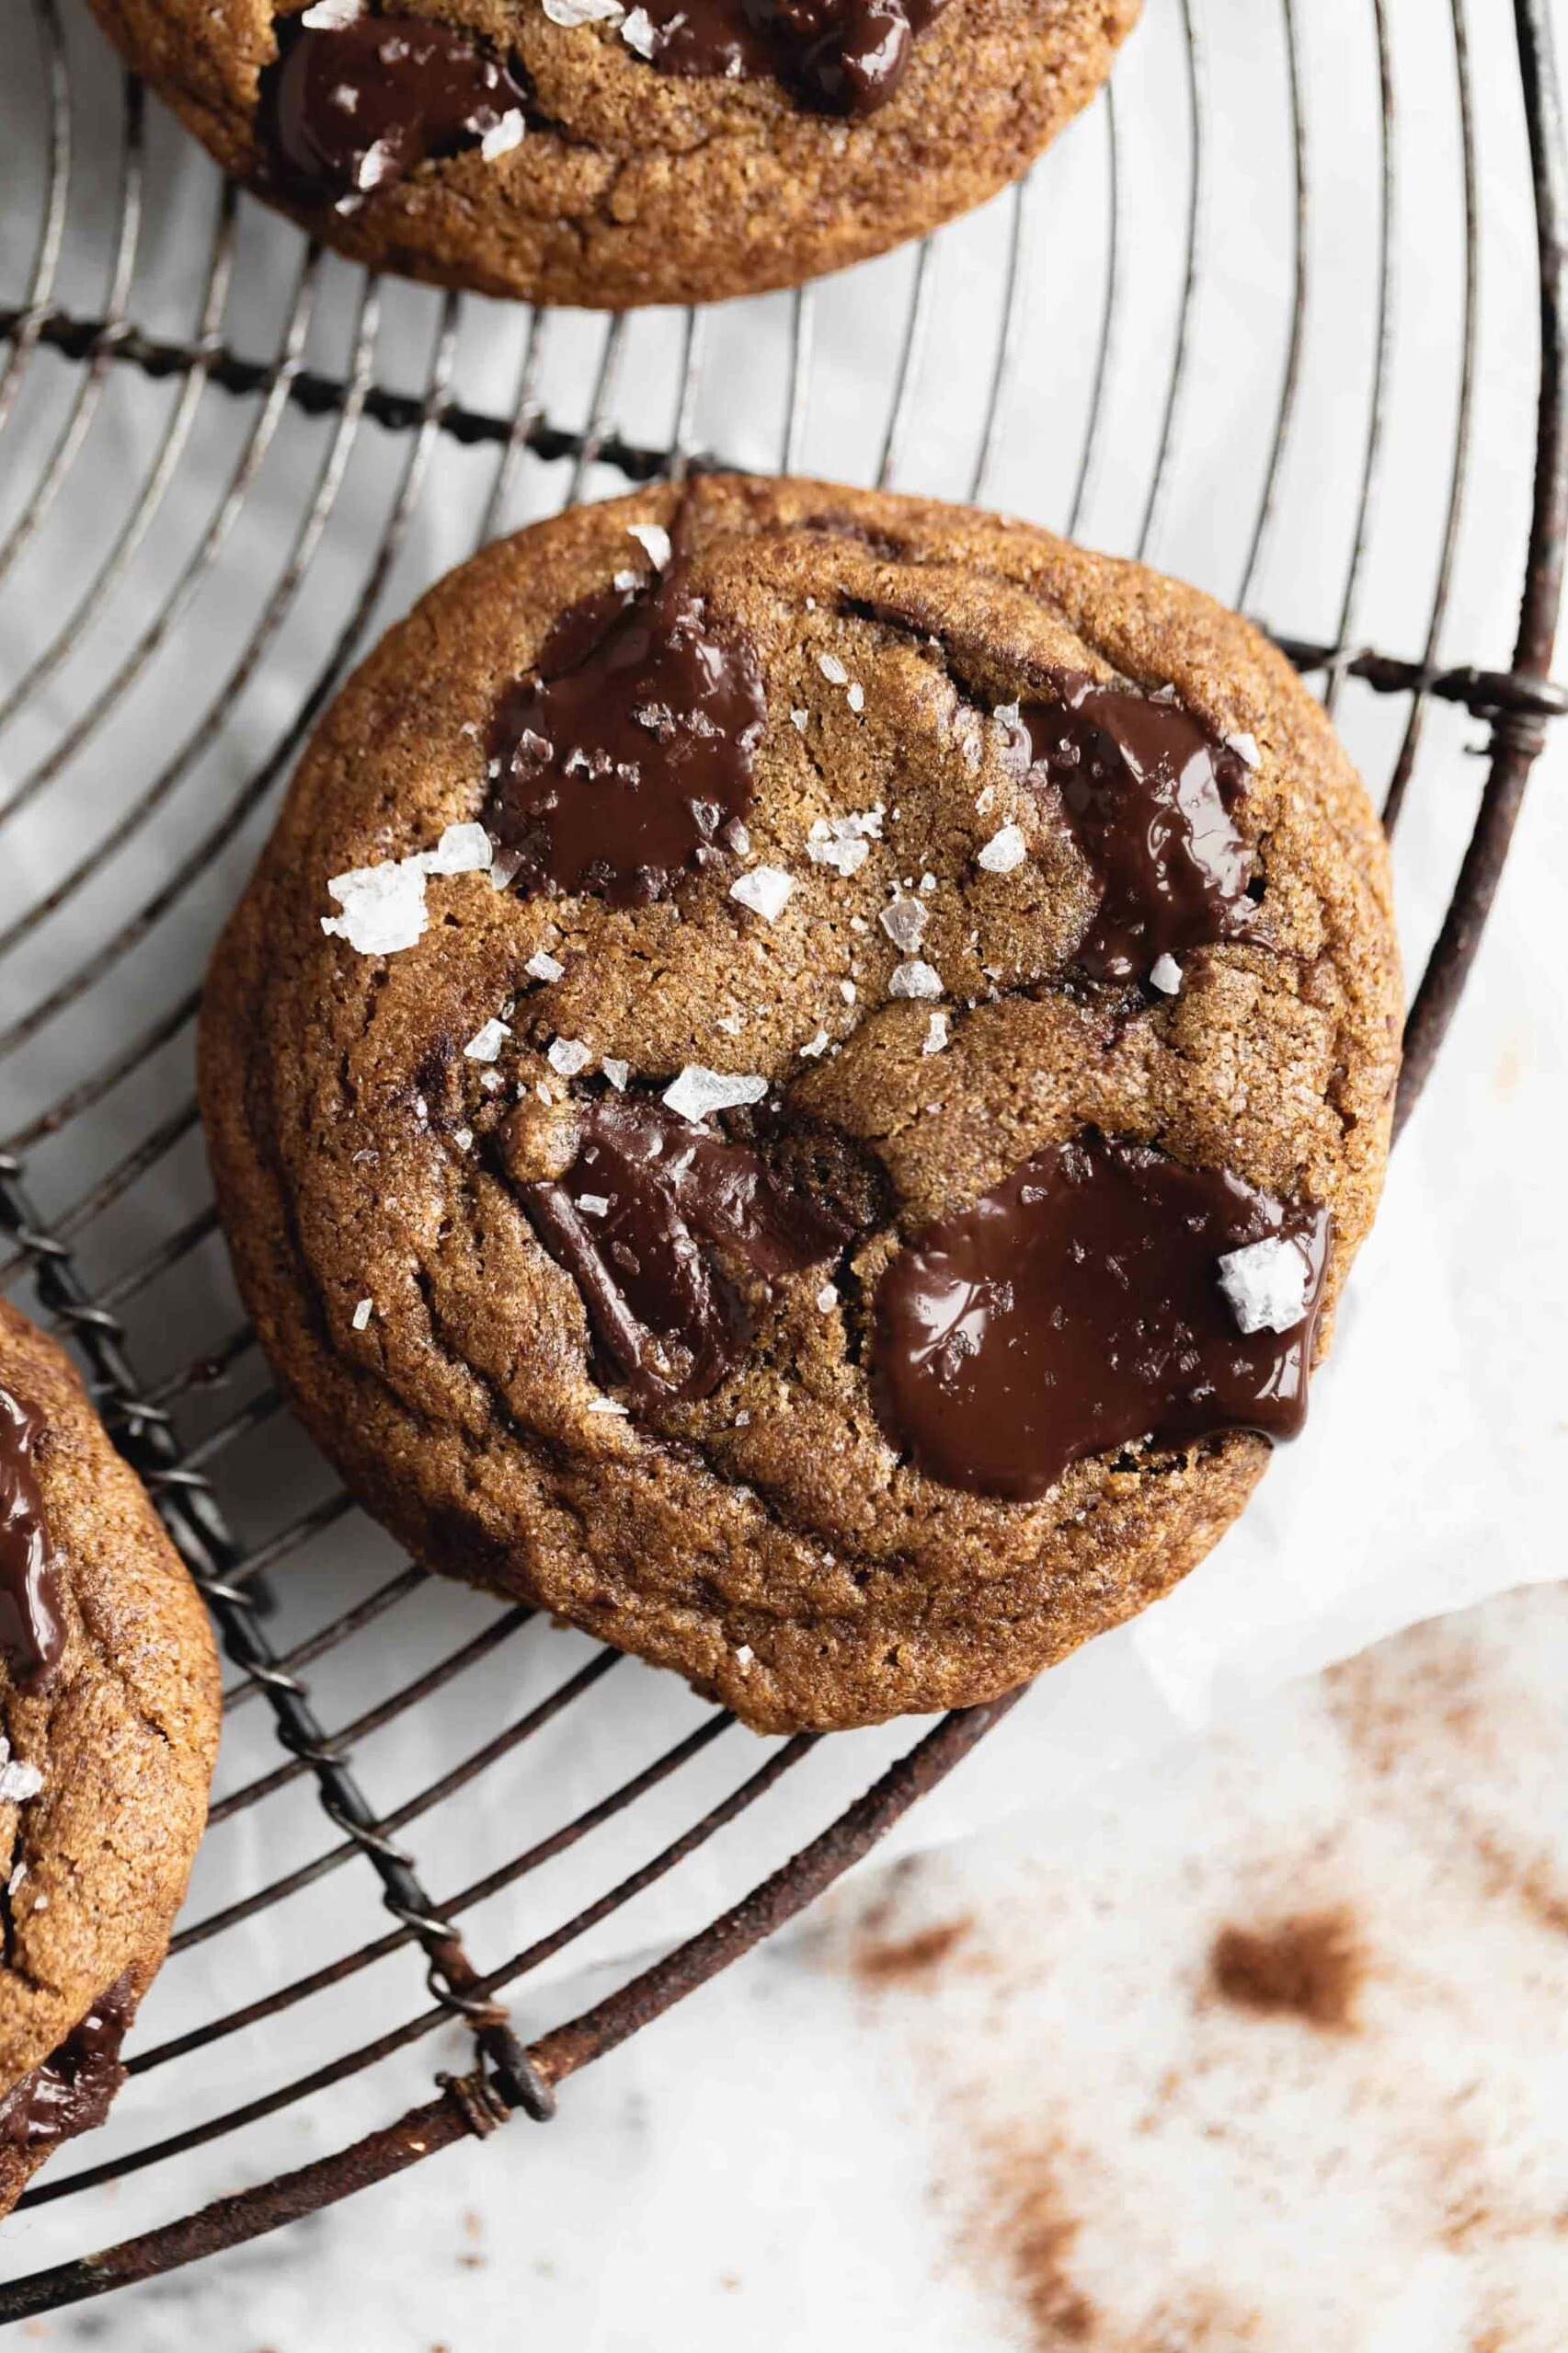  Give in to your sweet tooth and try these delicious coffee chocolate chip cookies.